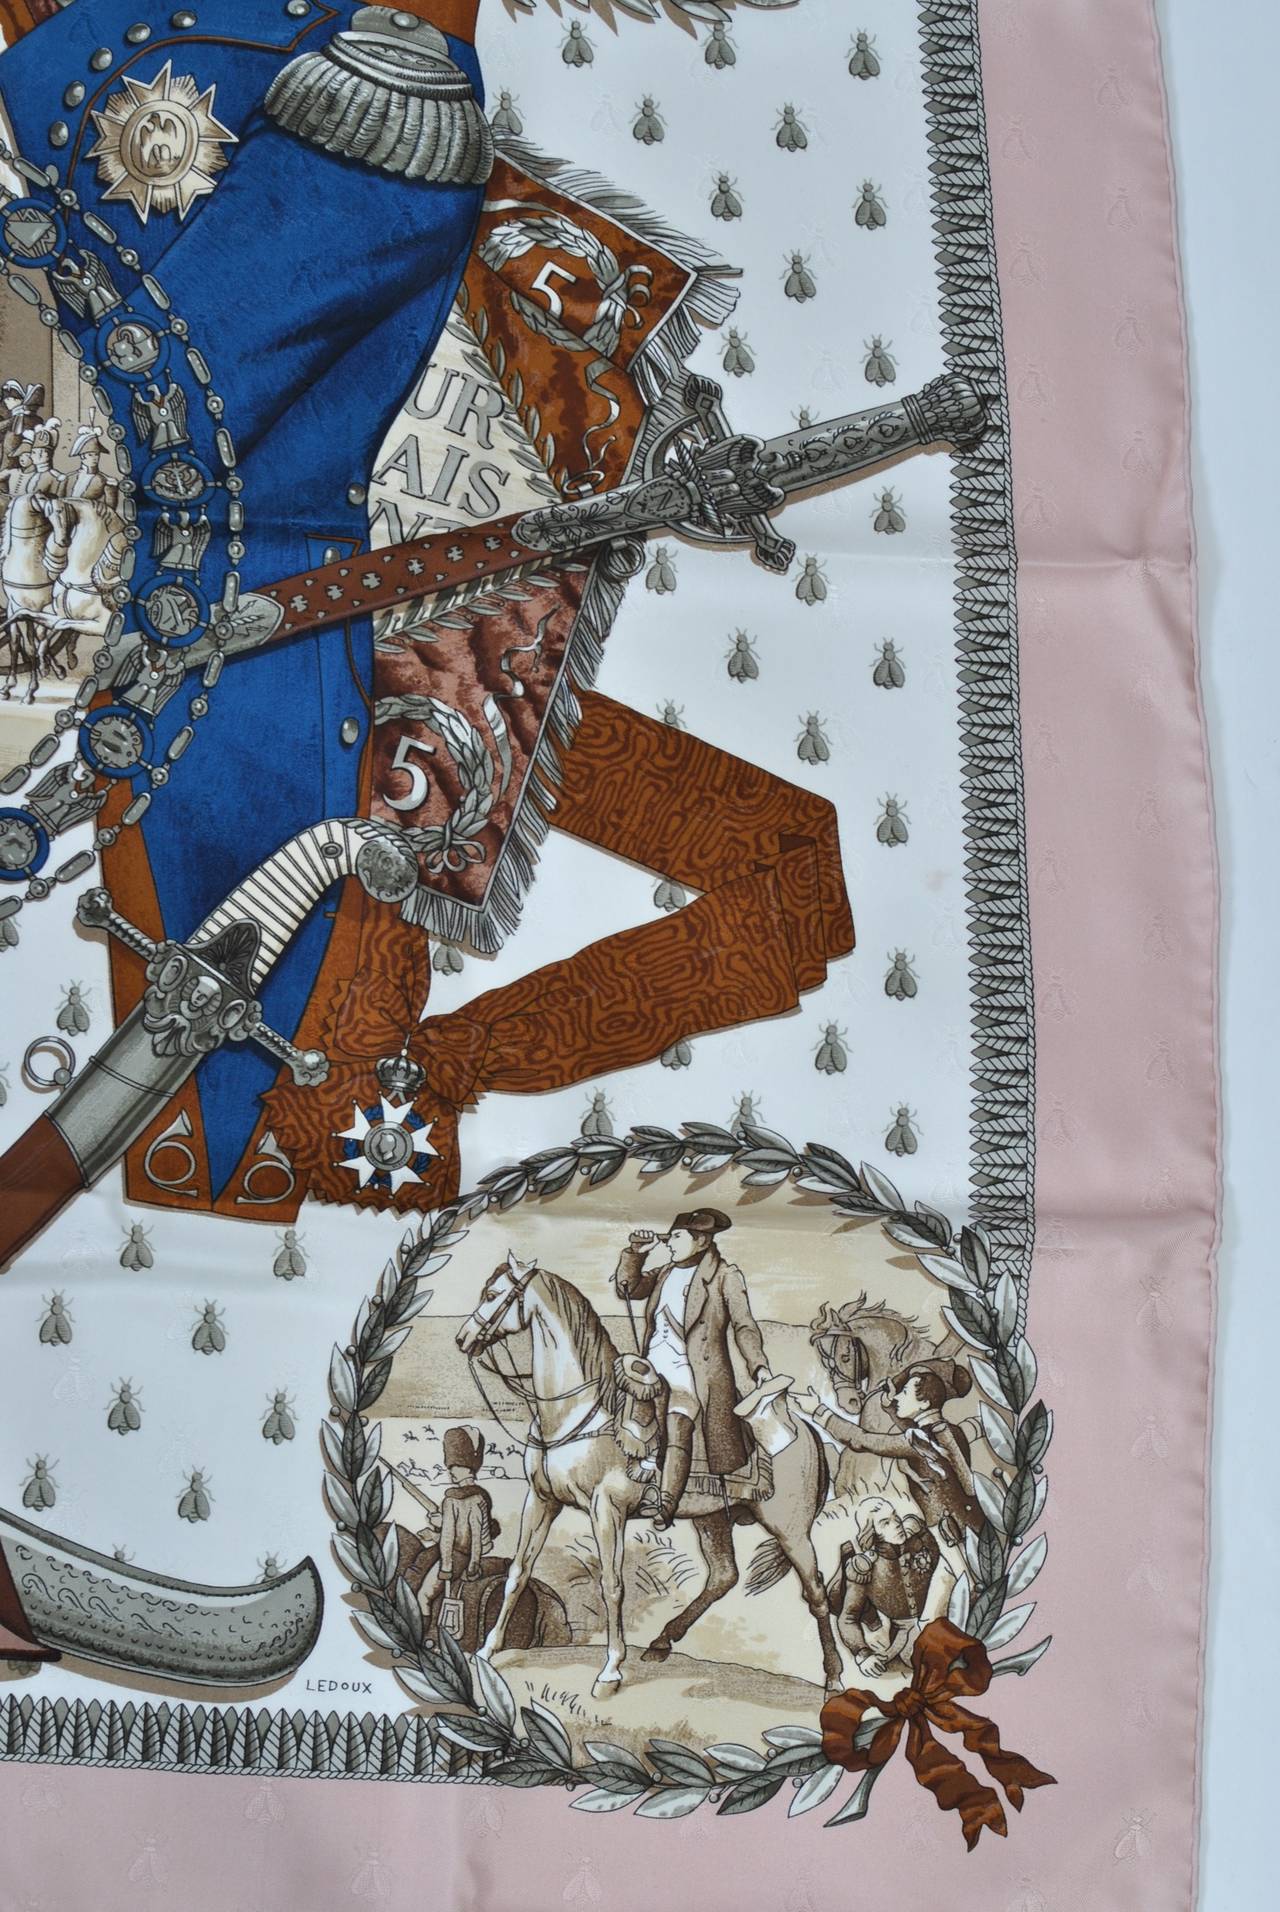 Hermès silk scarf commemorating Napoleon features a pale pink border and depicts scenes and items relevant to his reign. Hand rolled edges. Unused condition, in box. 1985 re-edition of a 1963 design by Ledoux. Measures 35